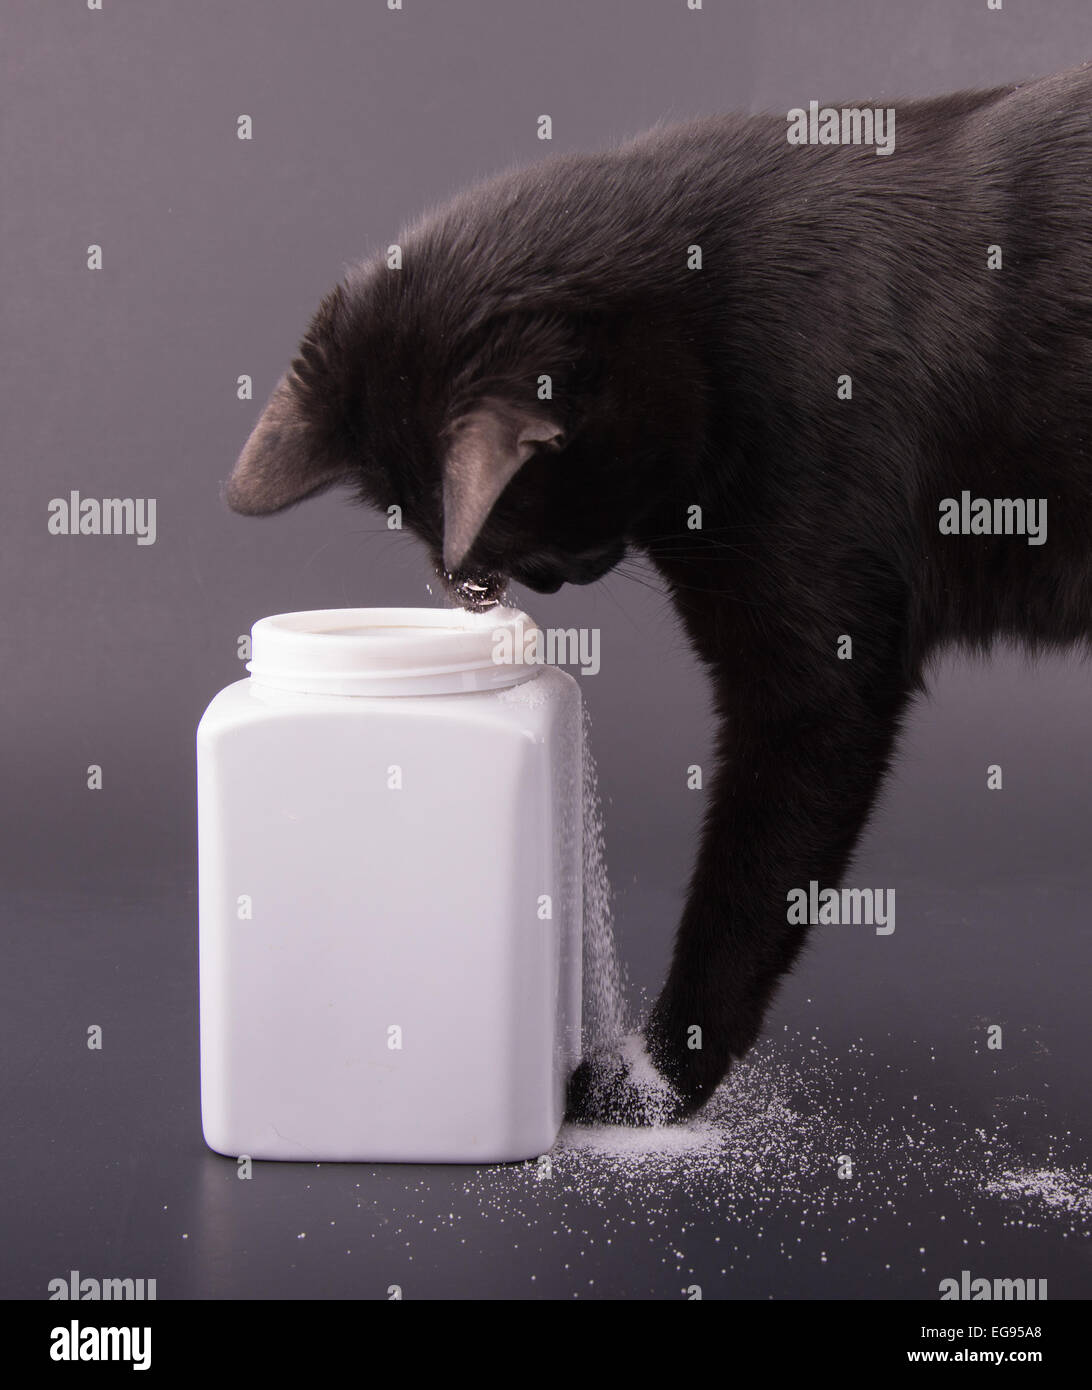 Comical image of a black cat spilling sugar out of a white jar, on dark gray background Stock Photo